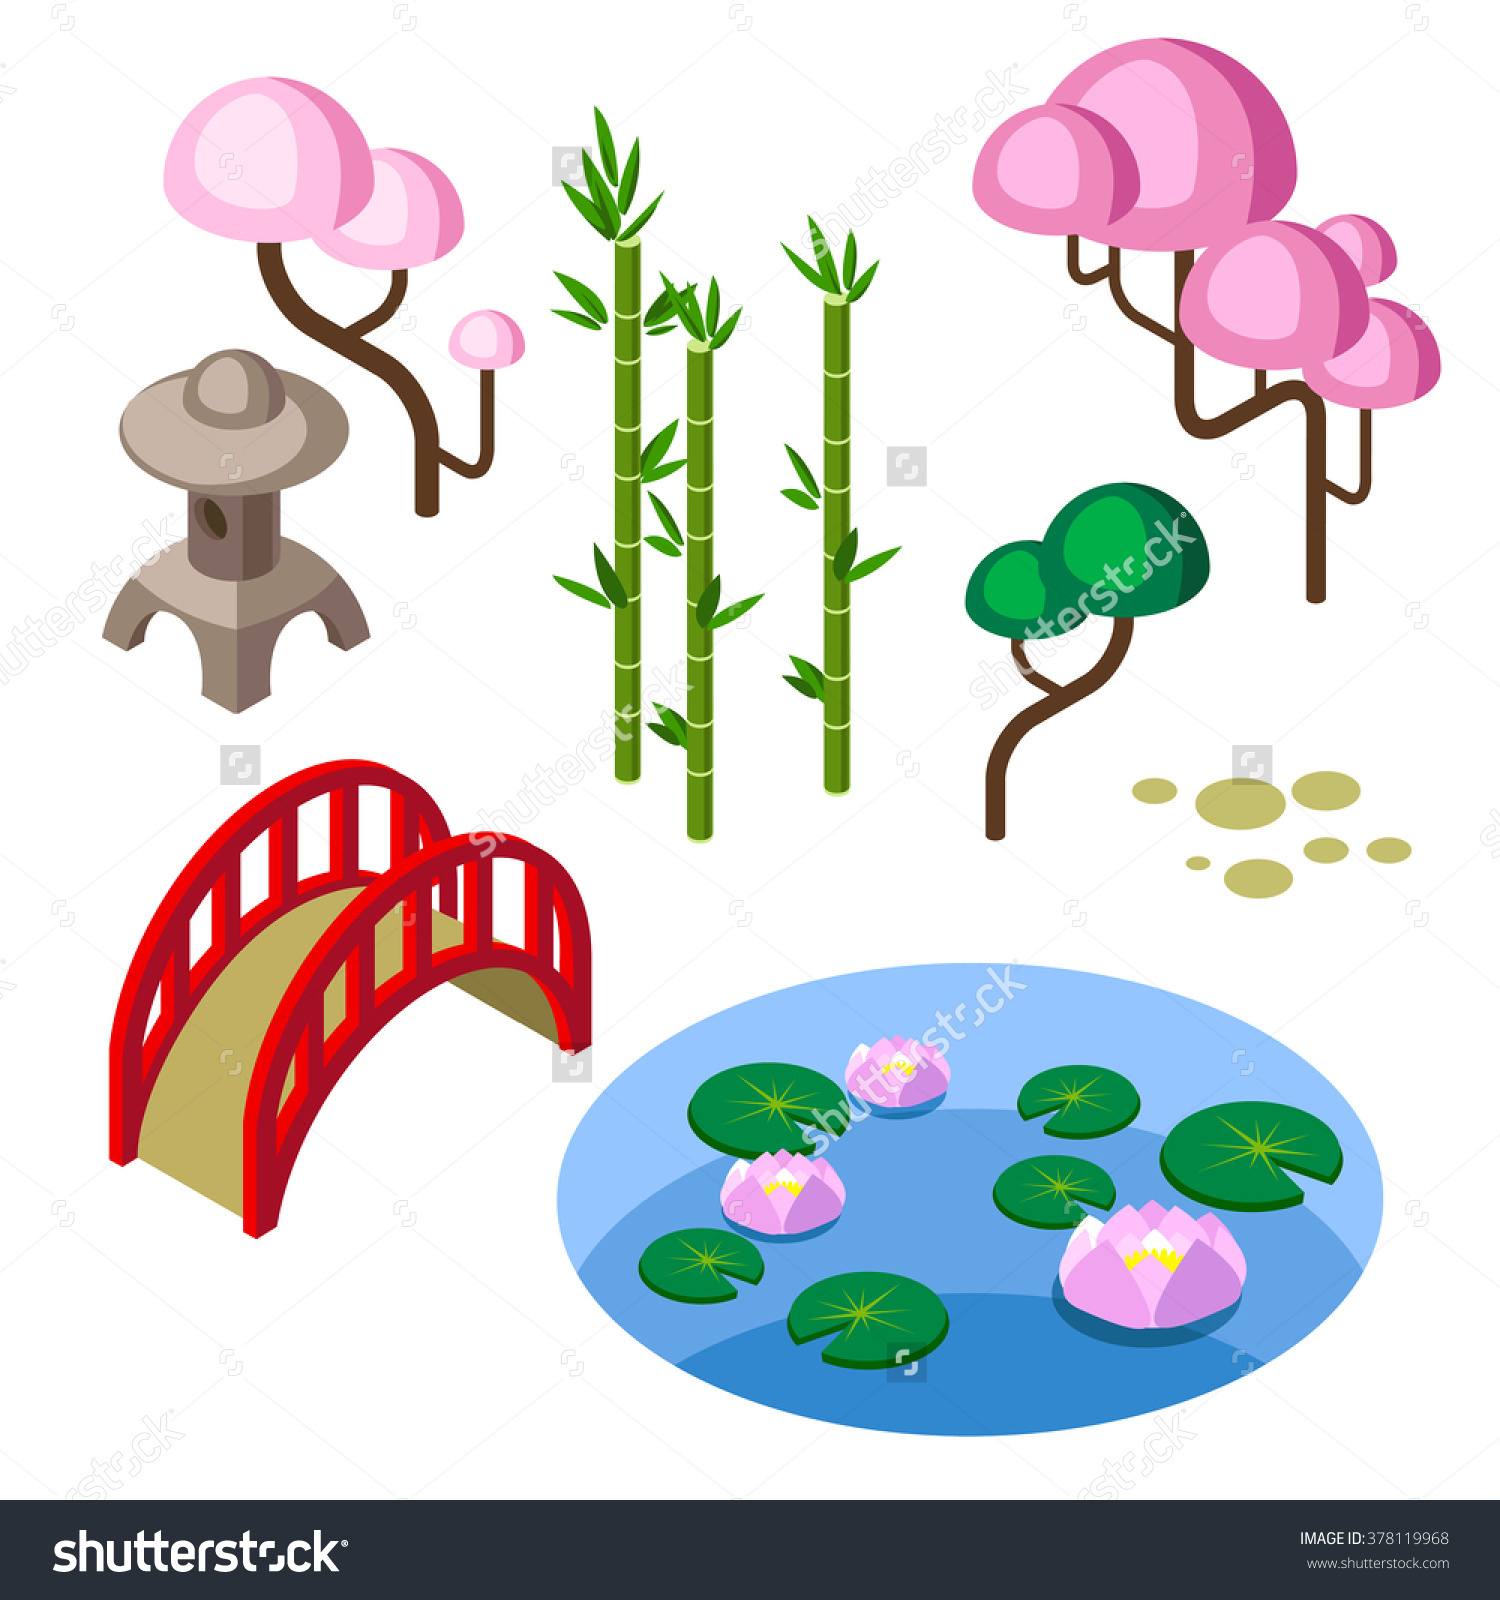 Japanese Garden clipart #5, Download drawings